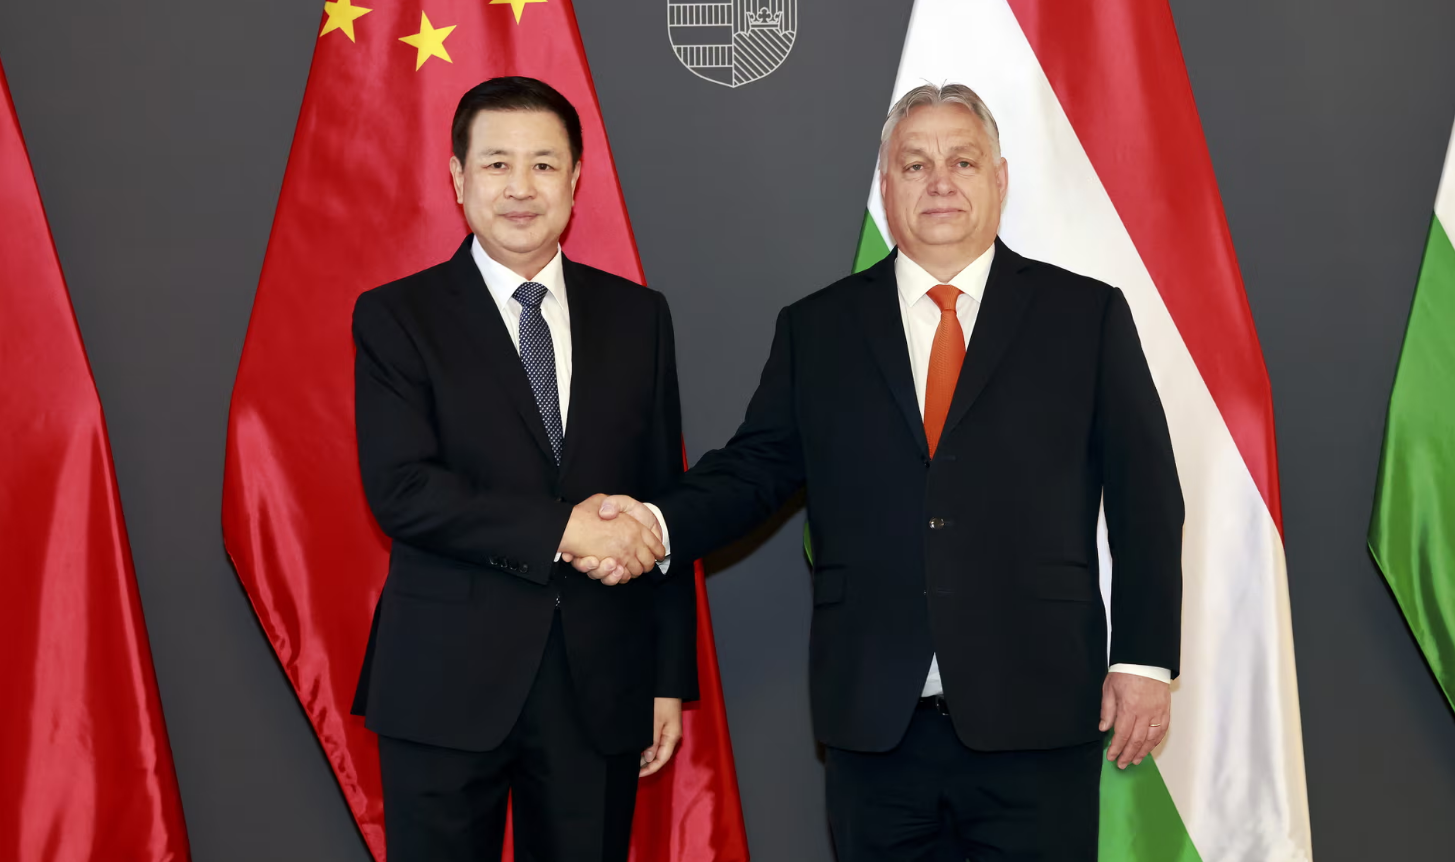 China offers to deepen security ties with Hungary